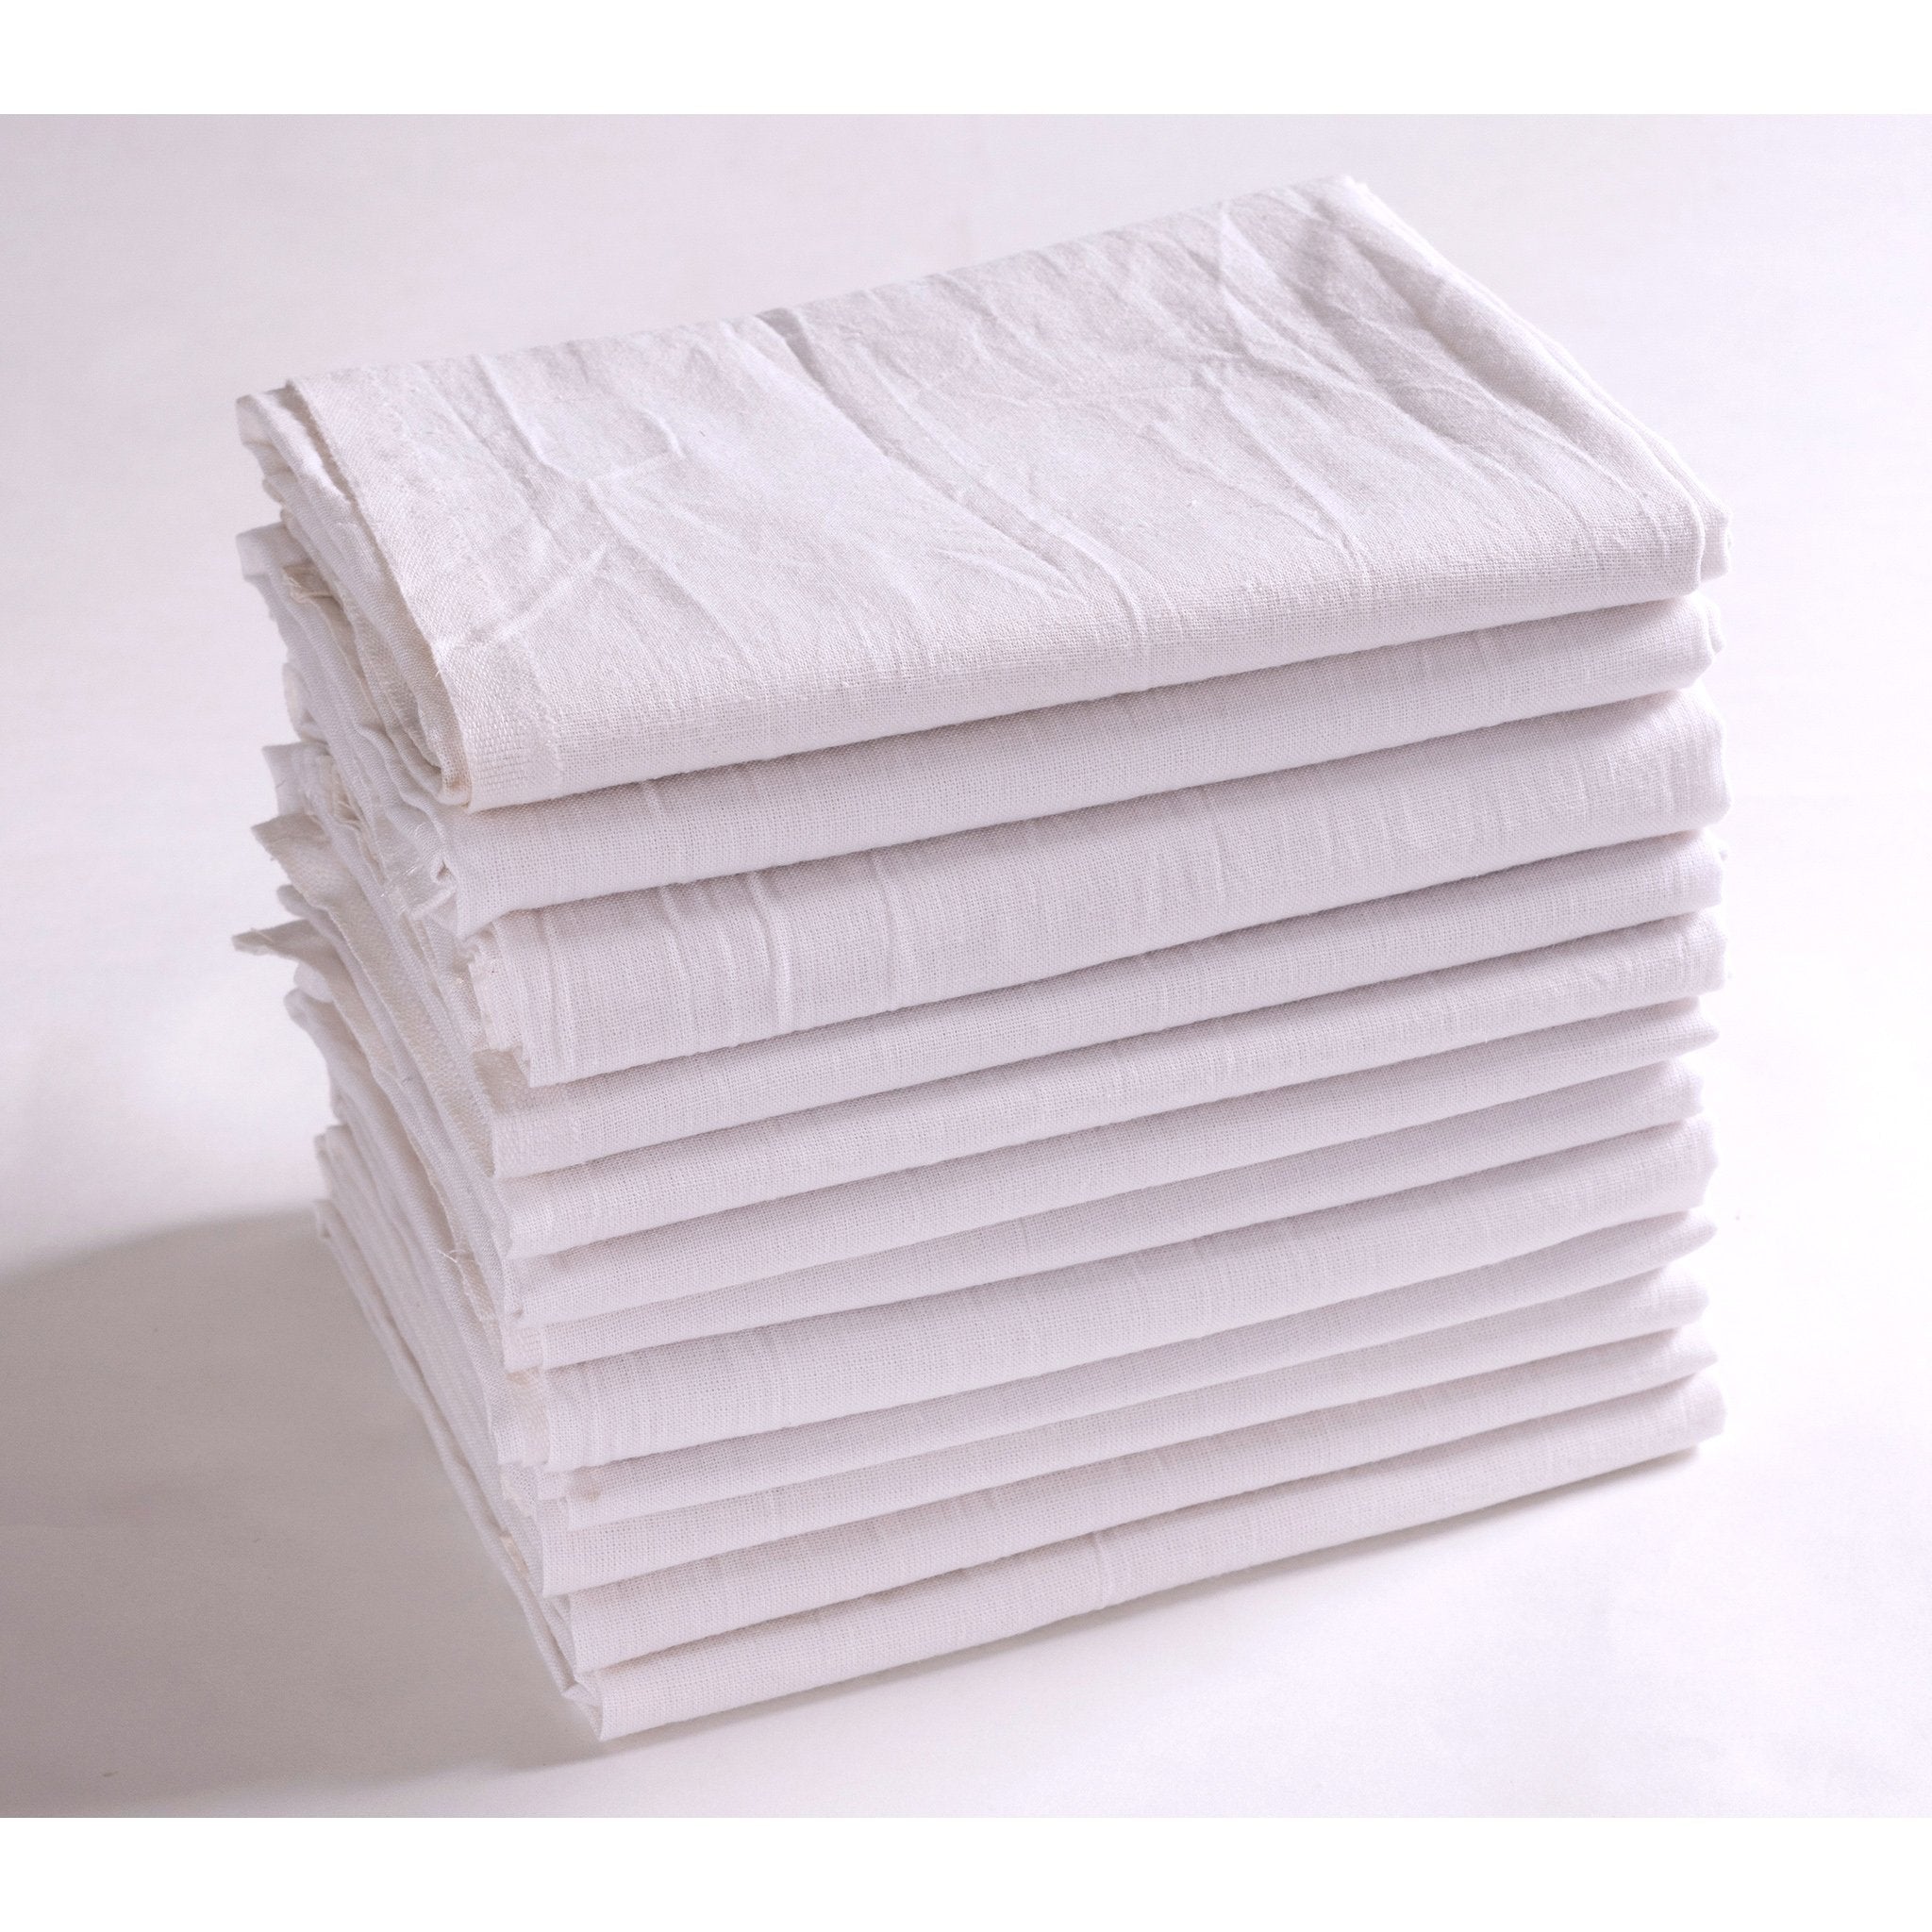 Hiera Home Kitchen Towels - Ultra Soft Cotton and Super Absorbent